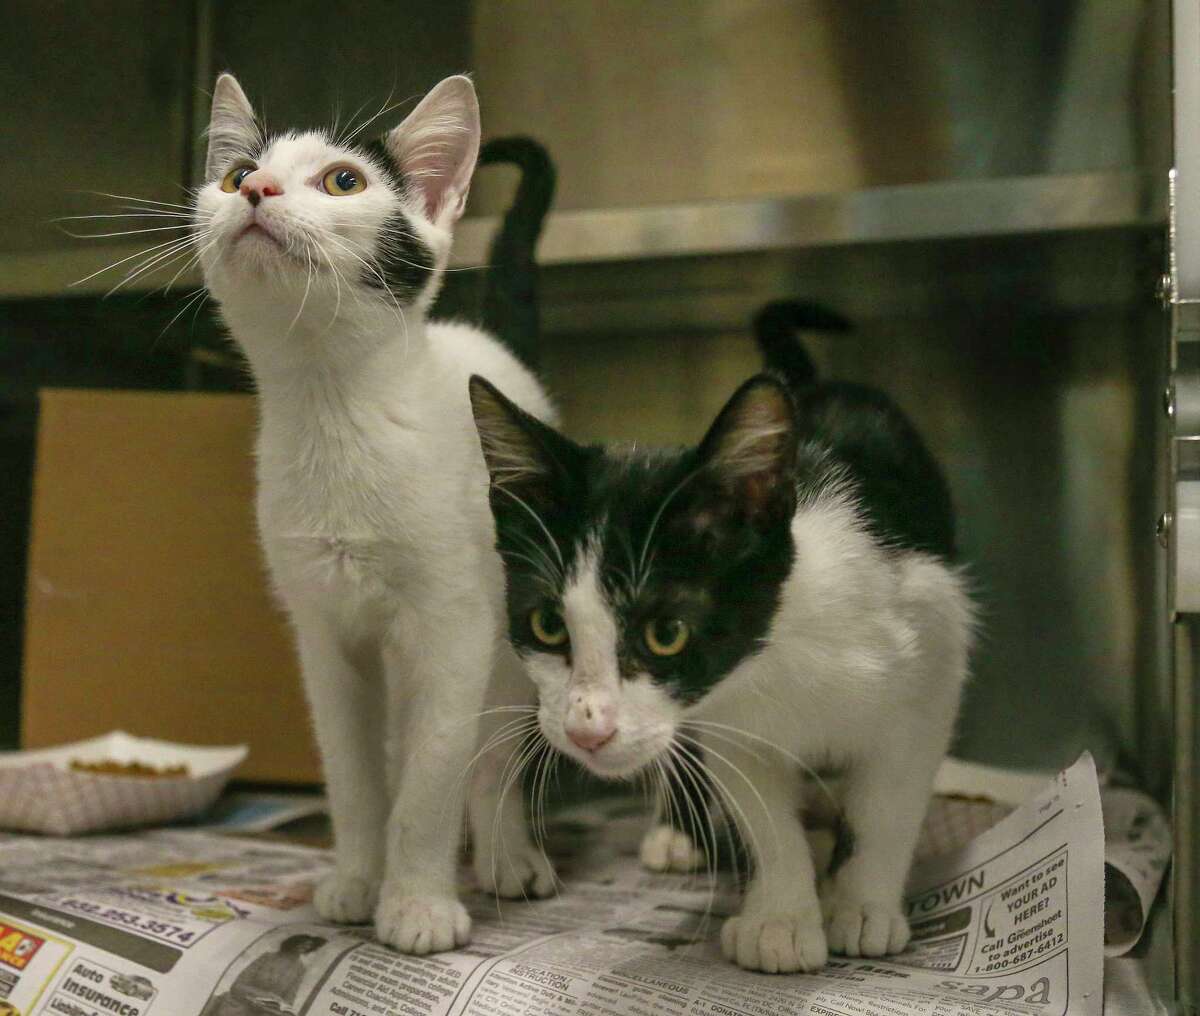 Lenny (left, A577404) and his brother, Squiggy (right, A577403) are 16-week-old, male, black/white Tuxedo kittens available for adoption at Harris County Pets. Photographed Wednesday July 21, 2021, in Houston. Lenny and Squiggy, along with their sisters, Laverne and Shirley, were found abandoned at a local animal hospital, and brought into the shelter on June 29th.